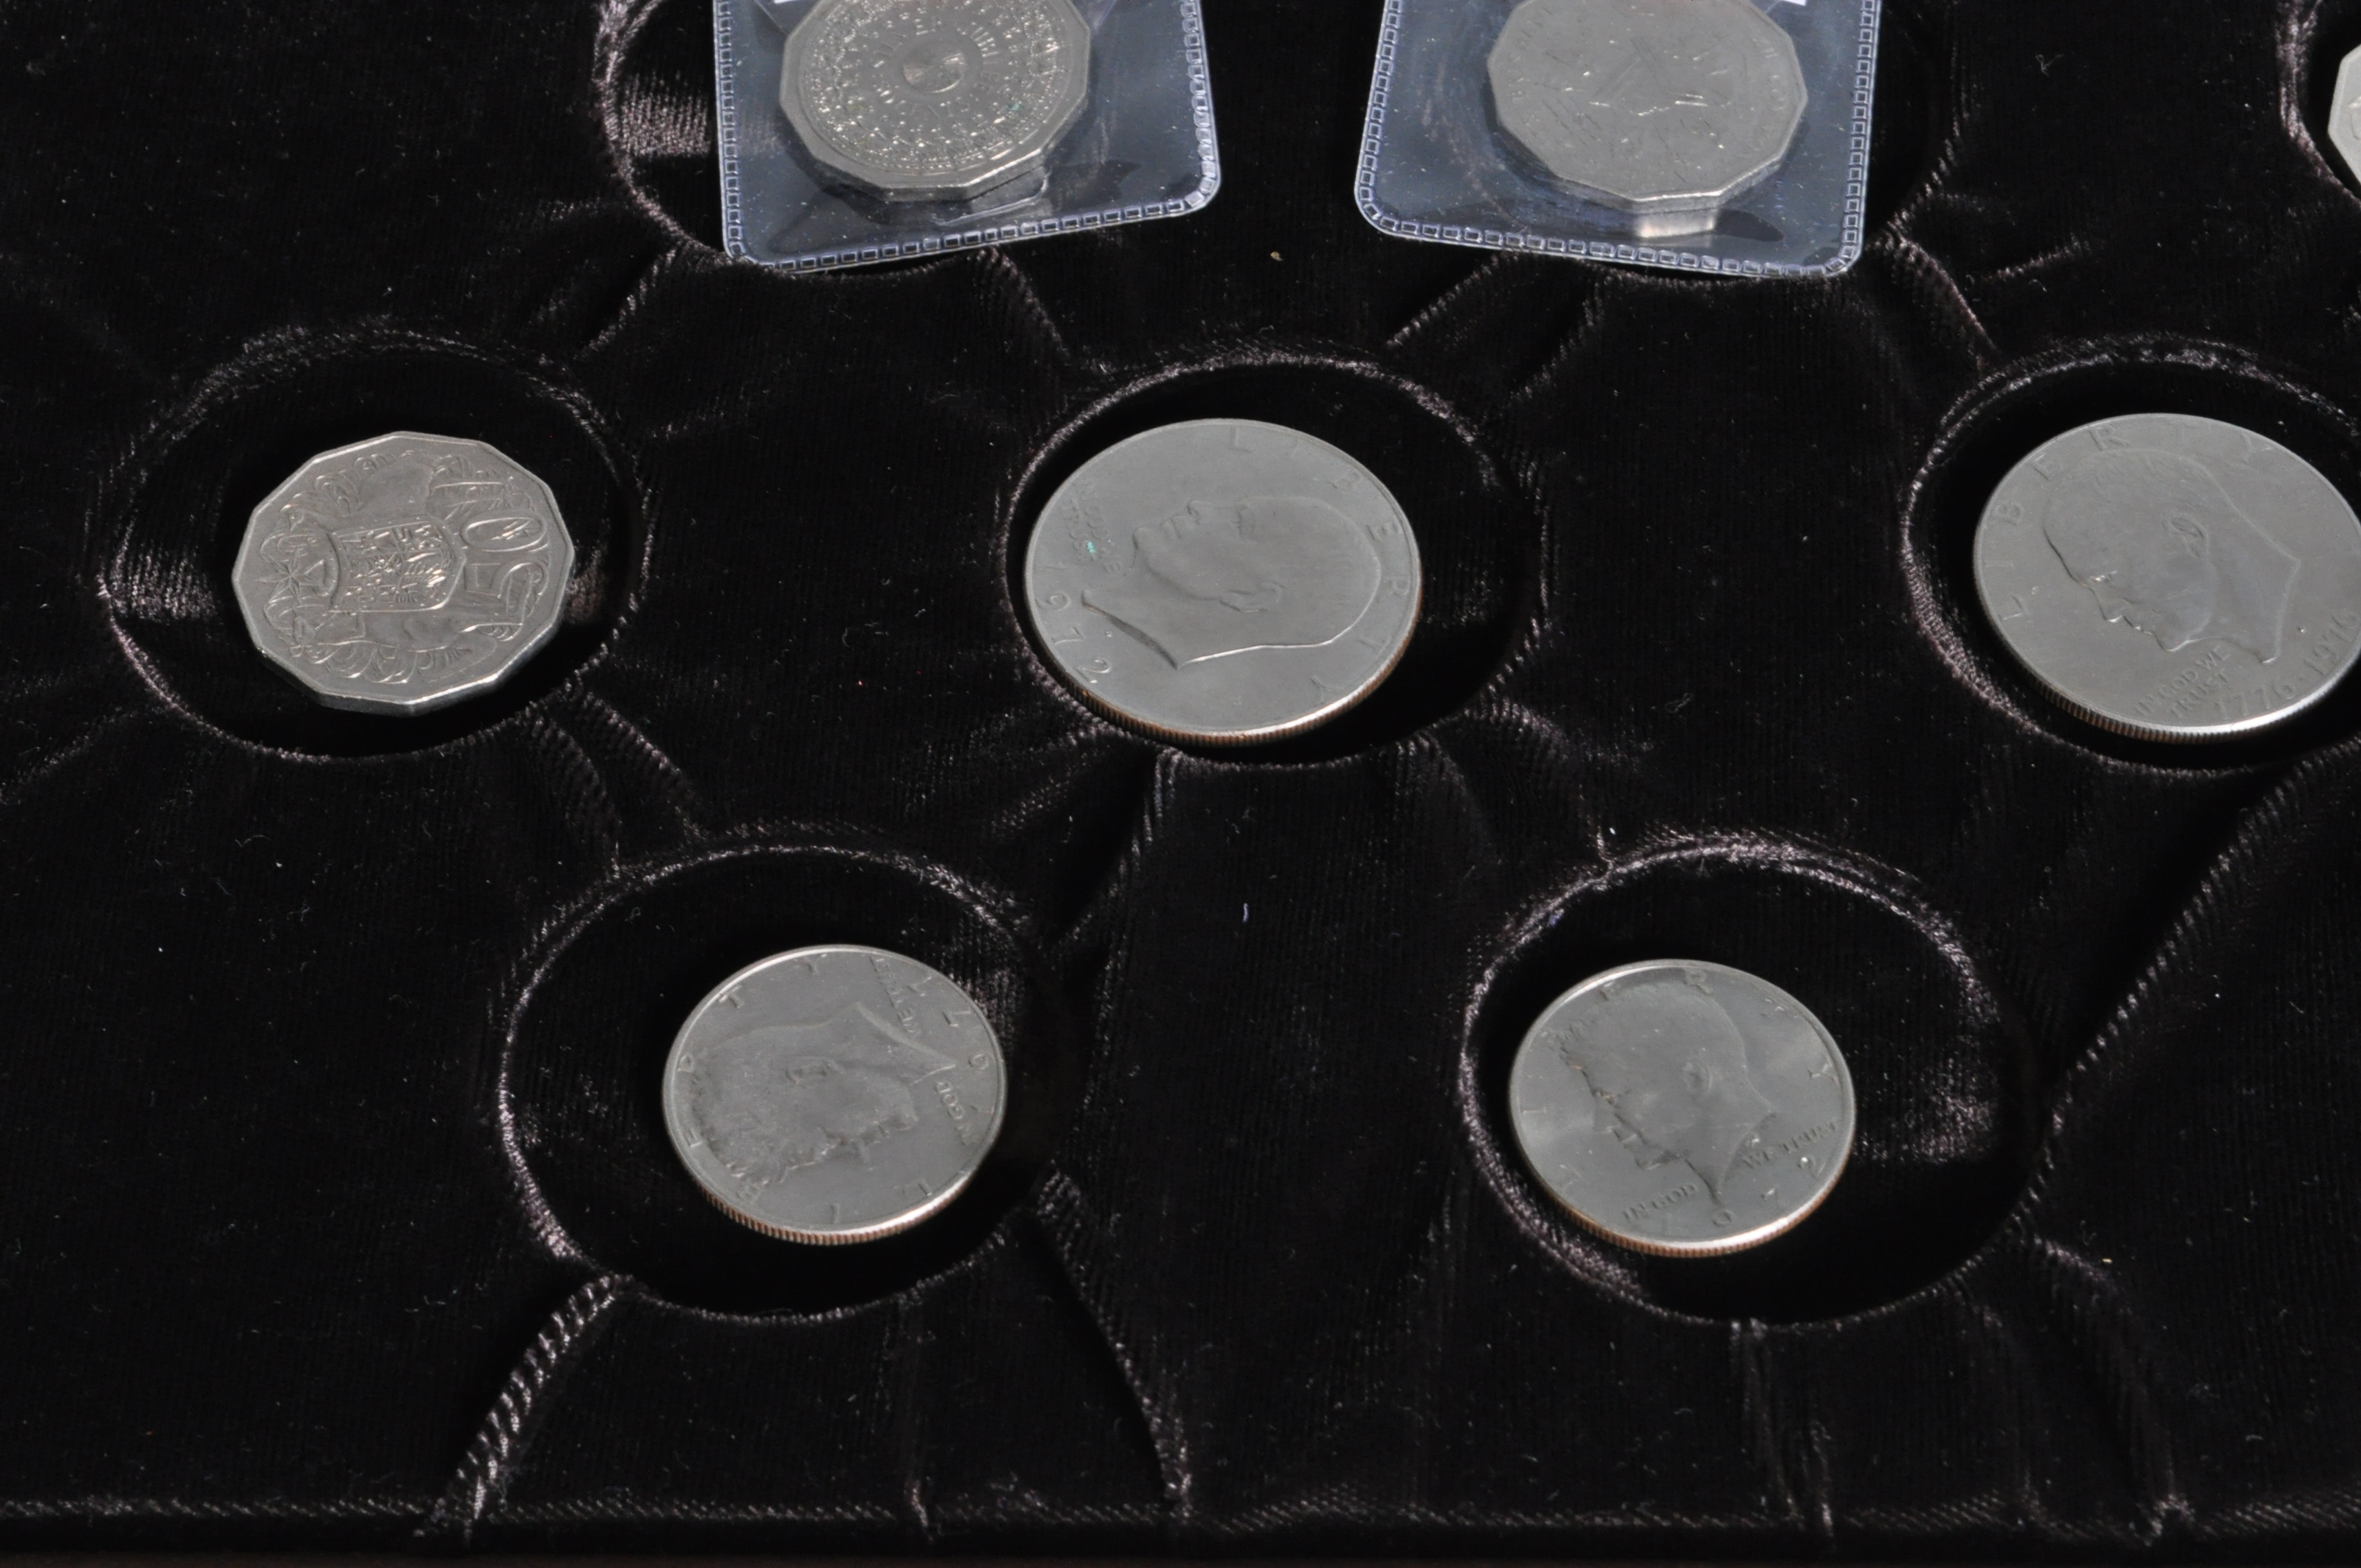 COLLECTION OF COINS AND MEDALS IN A WOODEN BOX - Image 9 of 11